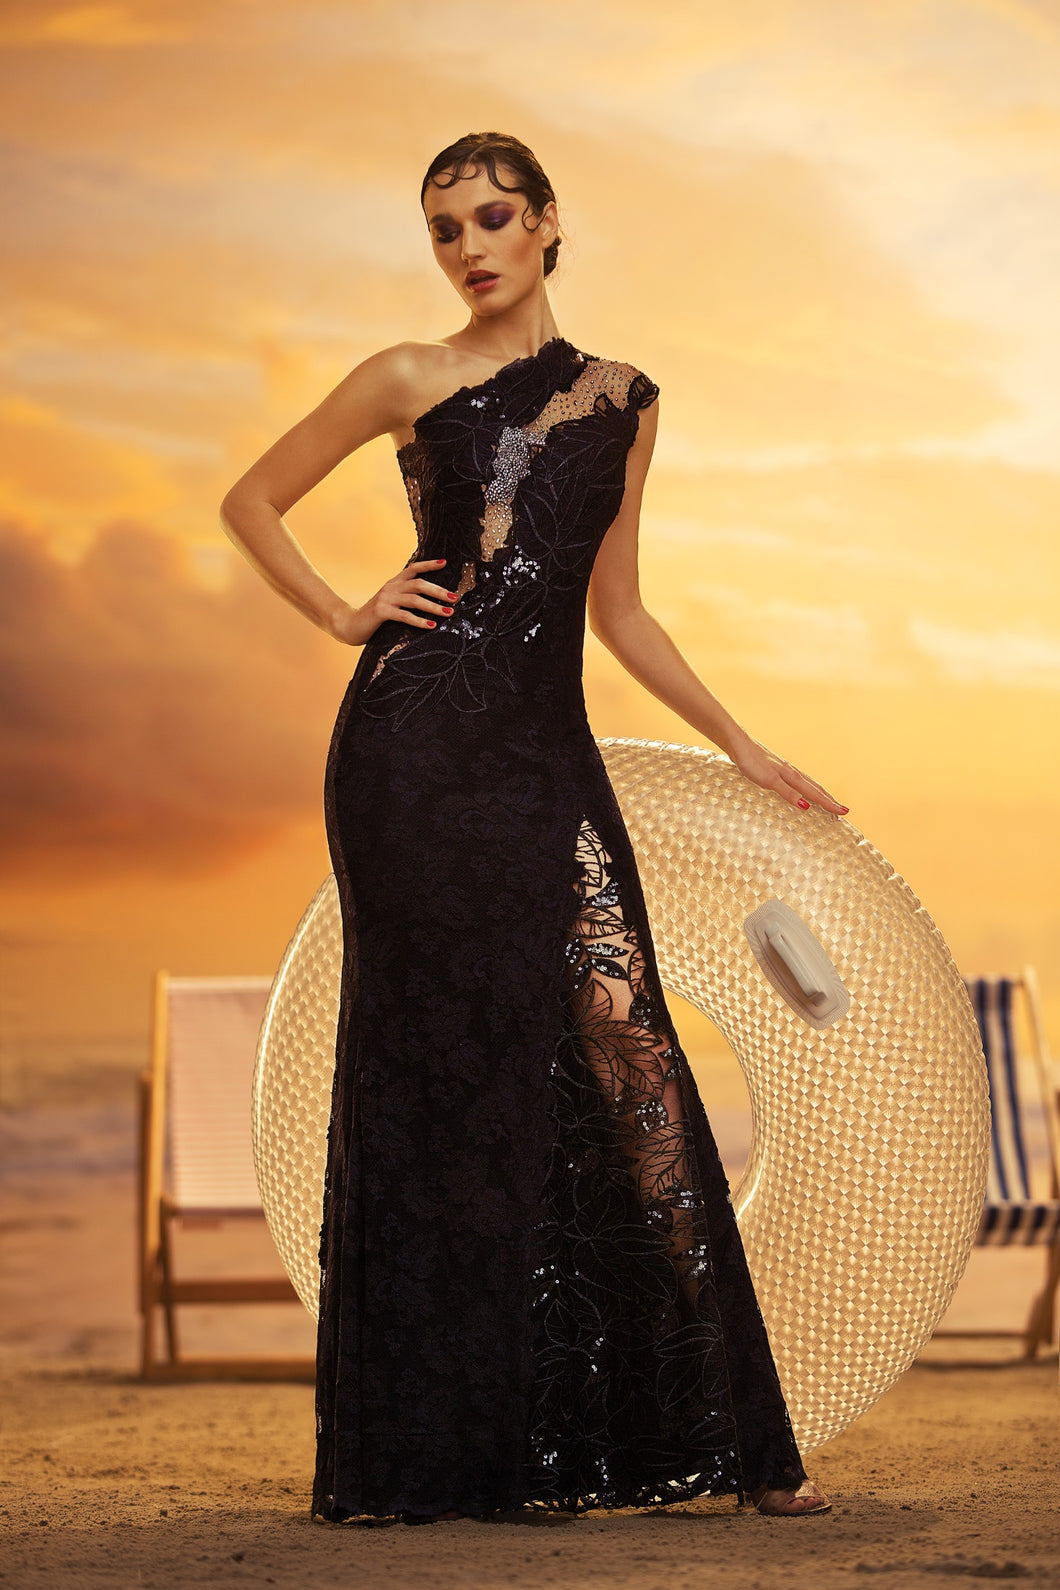 Stunning one-shoulder floor-length gown in lace with sheer insets in black.